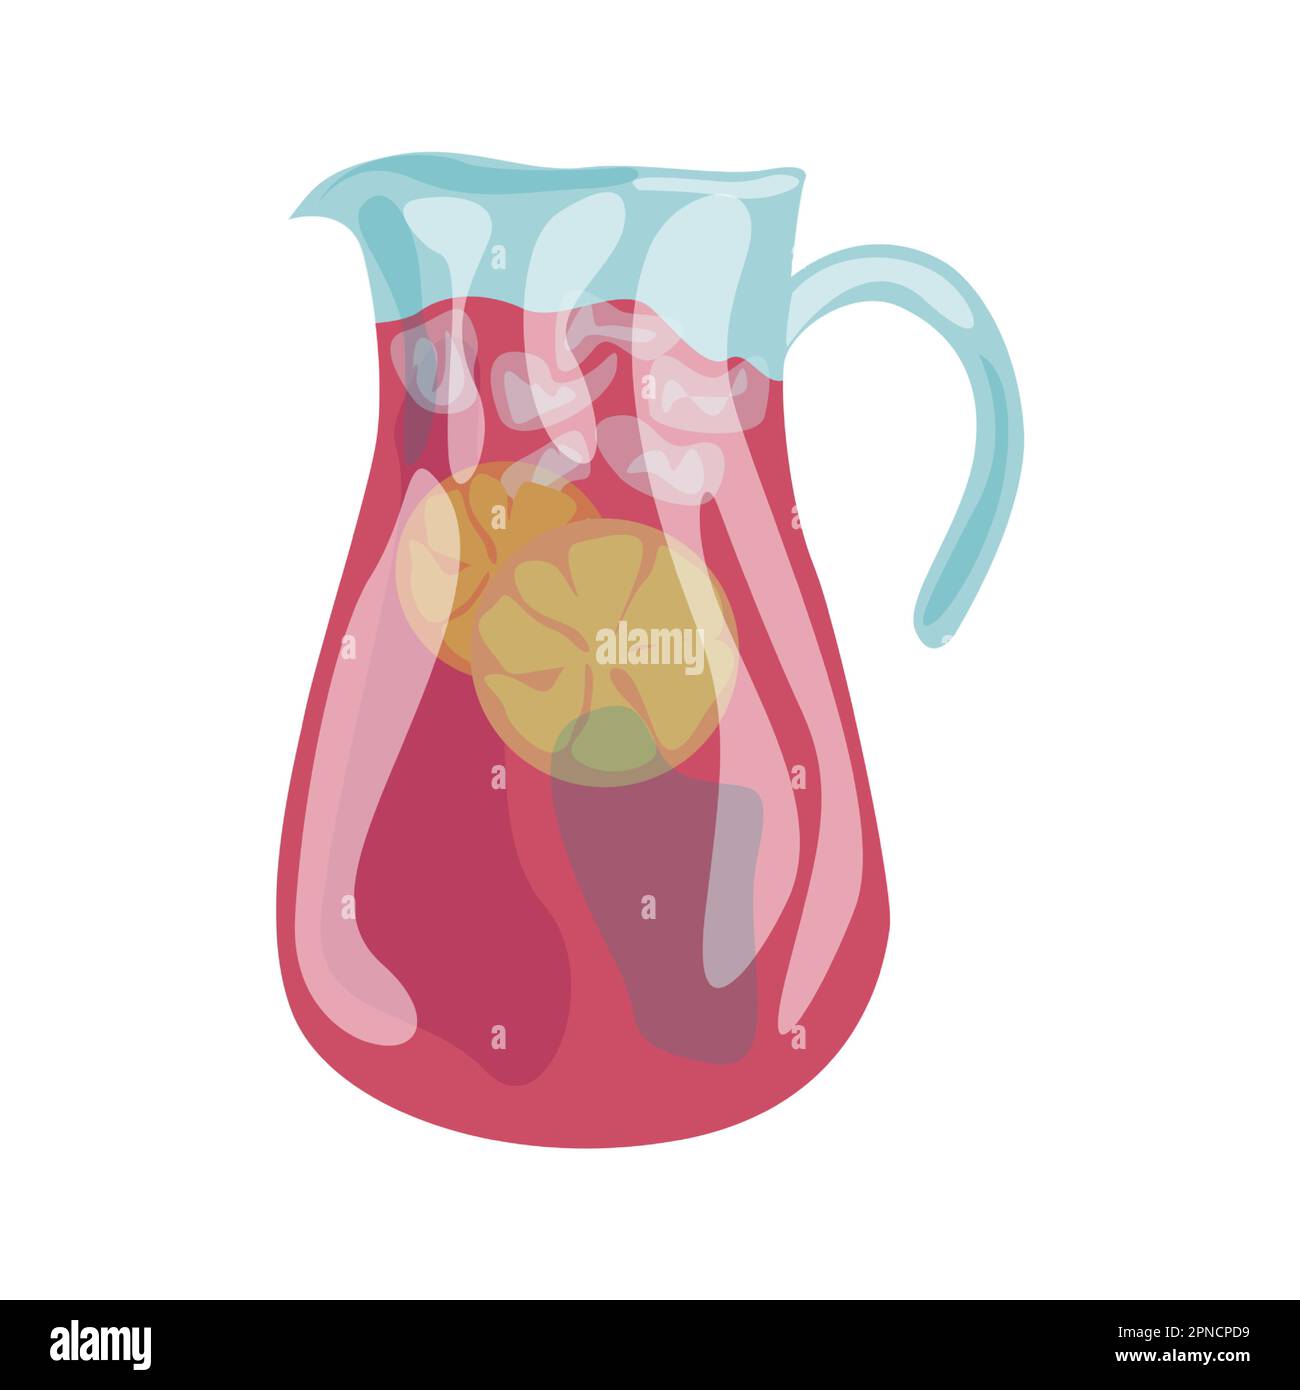 https://c8.alamy.com/comp/2PNCPD9/pitcher-with-punch-illustration-in-color-cartoon-style-editable-vector-graphic-design-2PNCPD9.jpg